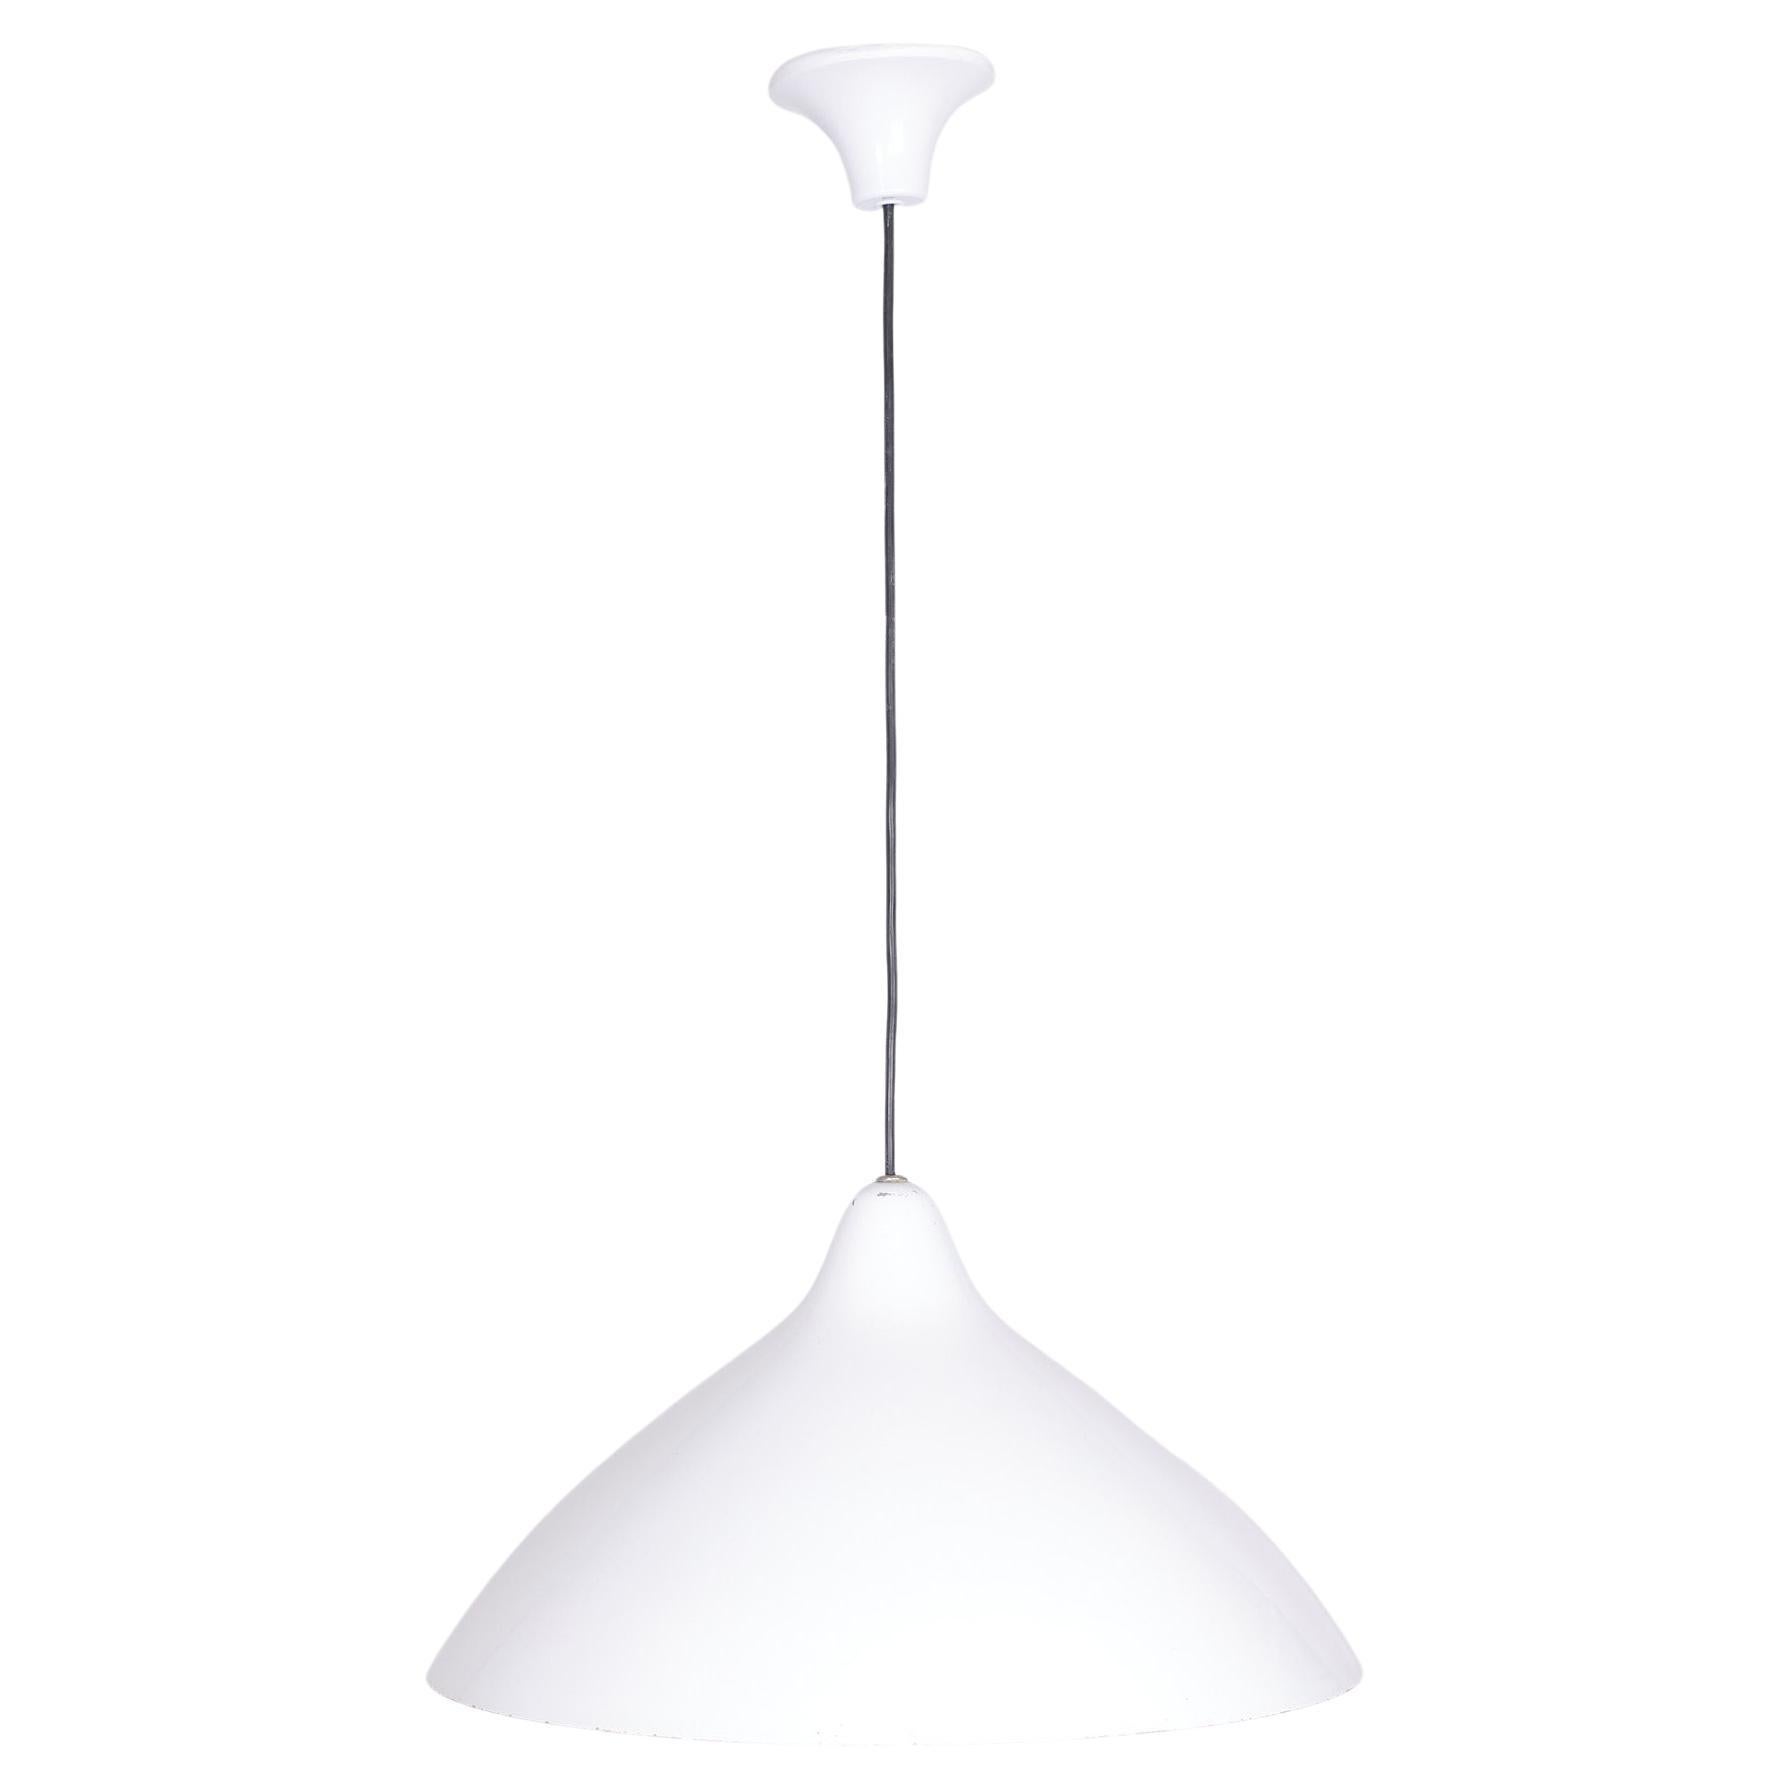  White Pendant Lamp by Lisa Johansson Pape for Orno, Finland 1950s 